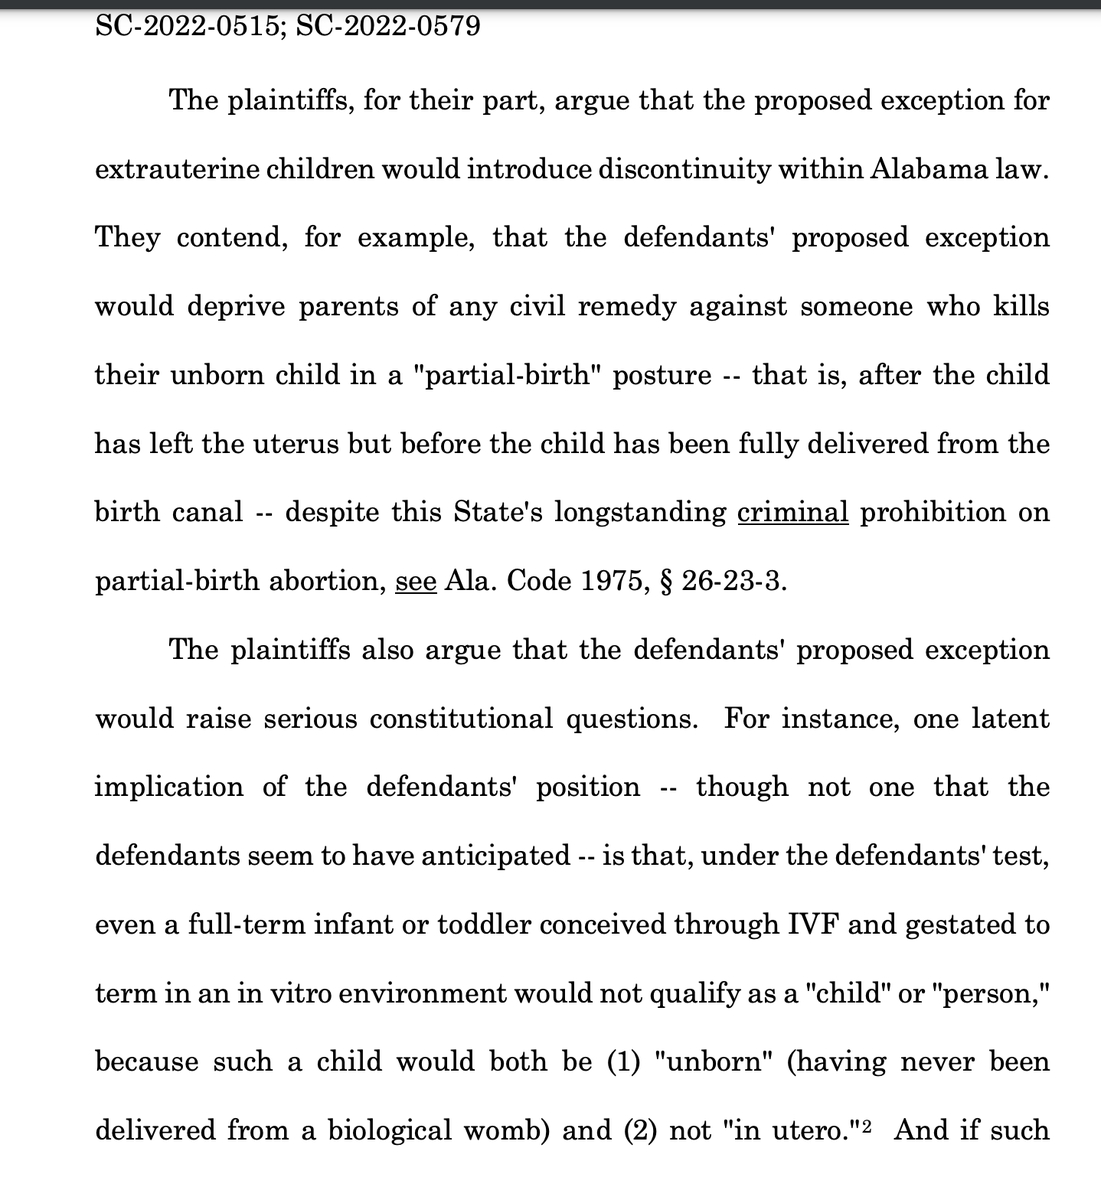 Link to the decision and screen caps of the first part of the court's analysis referencing ectogenesis. cases.justia.com/alabama/suprem…